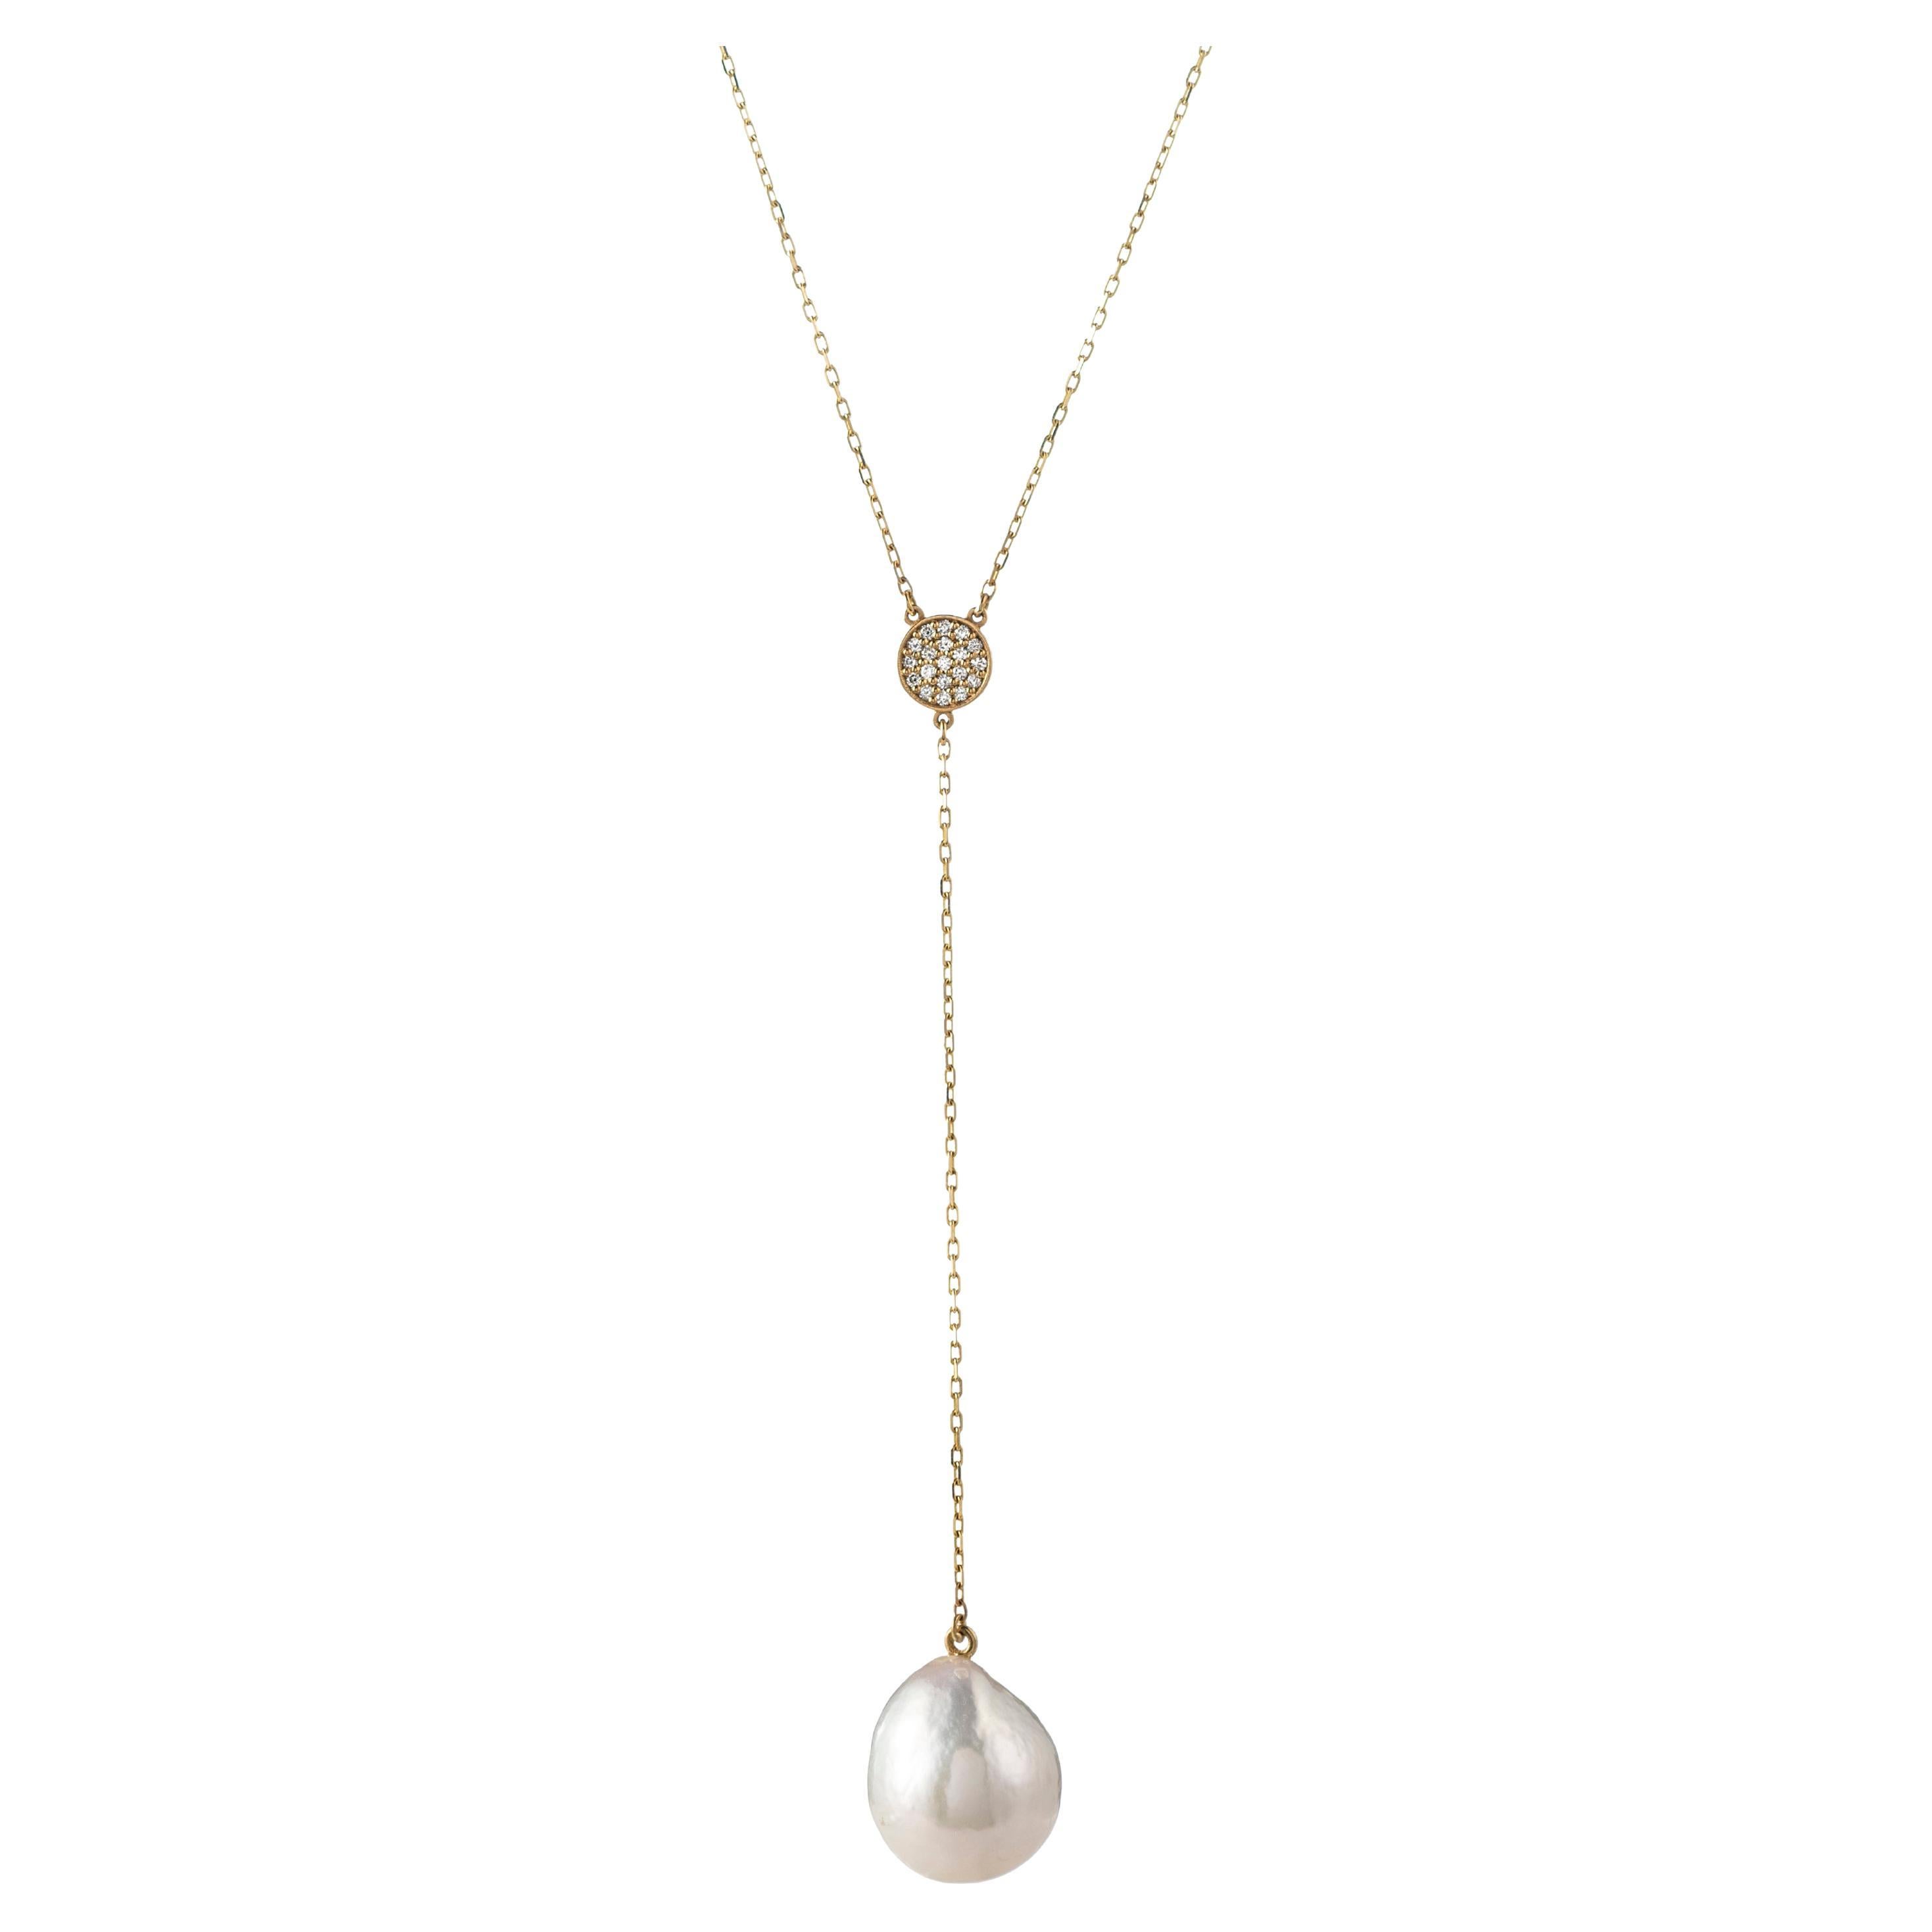 Diamond and Pearl Lariat Necklace, 18K For Sale